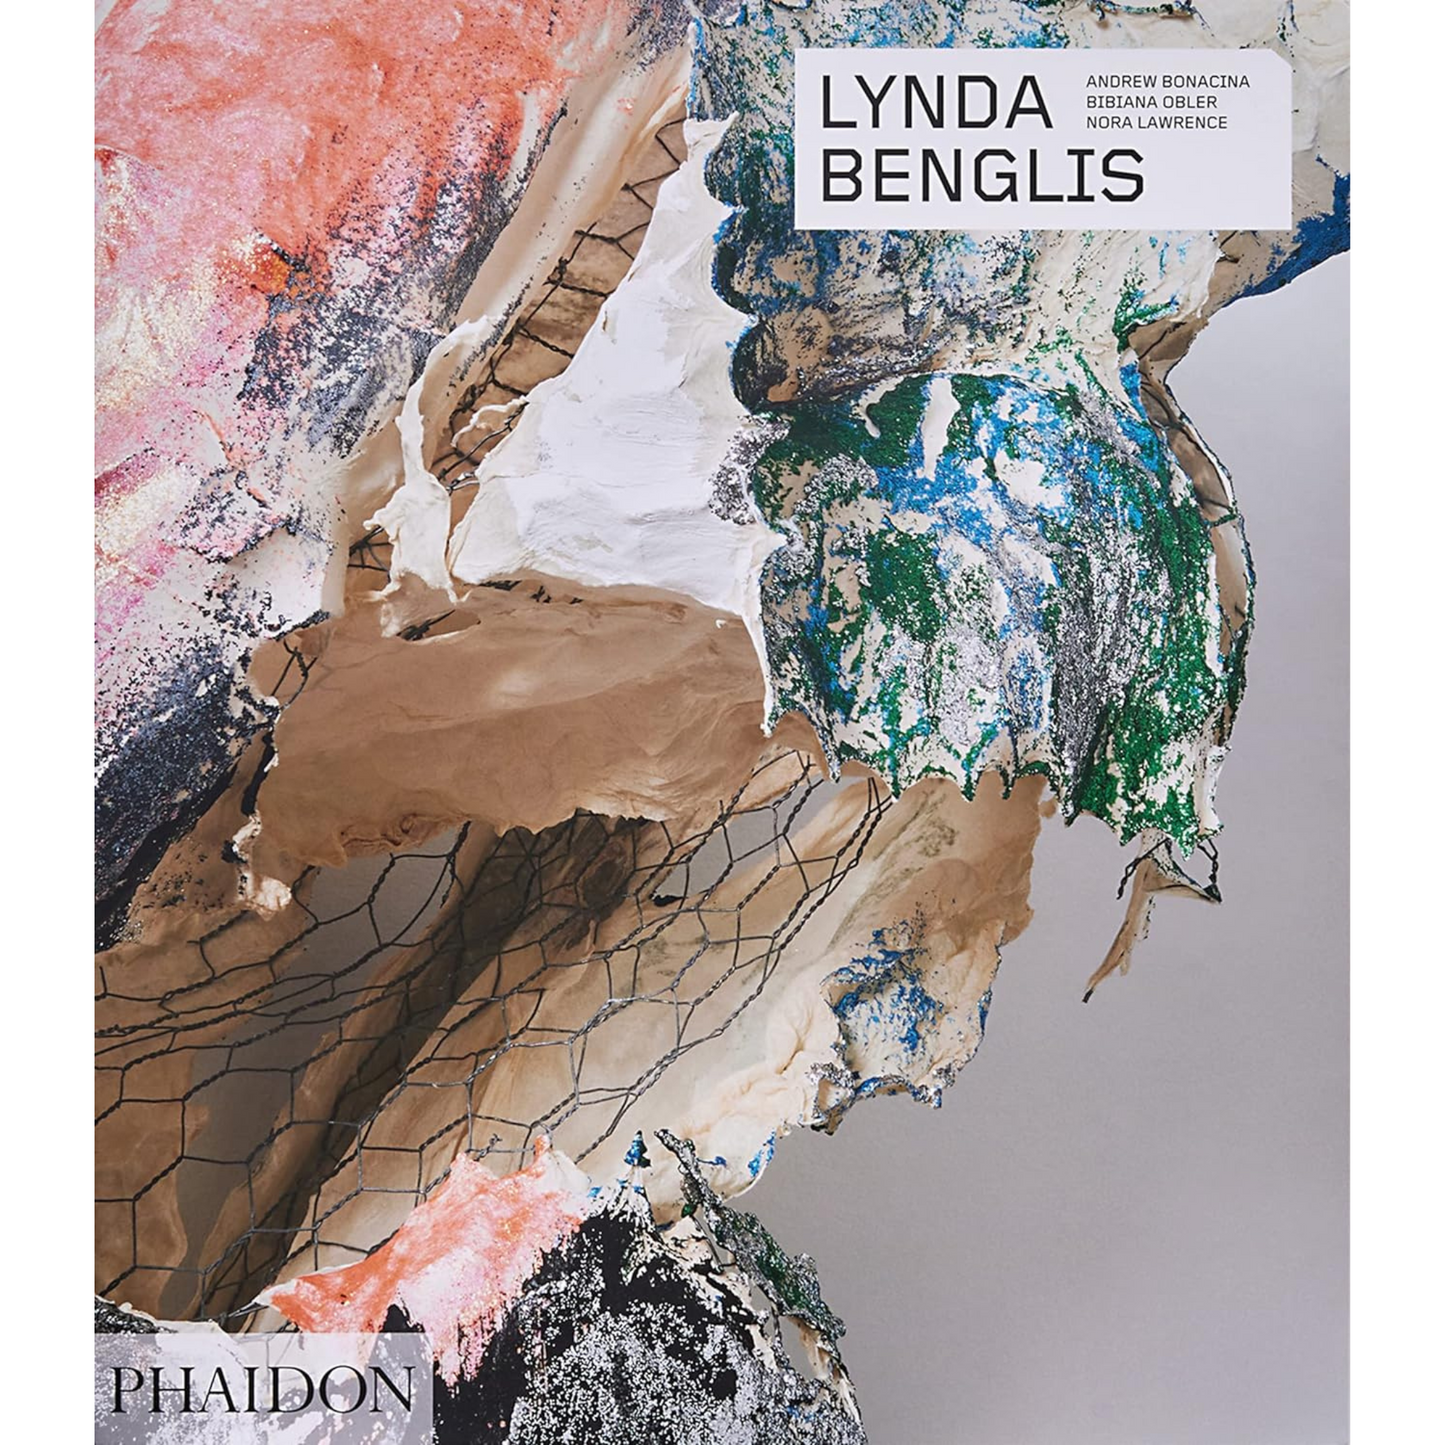 Cover of Lynda Benglis monograph, featuring a close up show the texture of a sculpture.